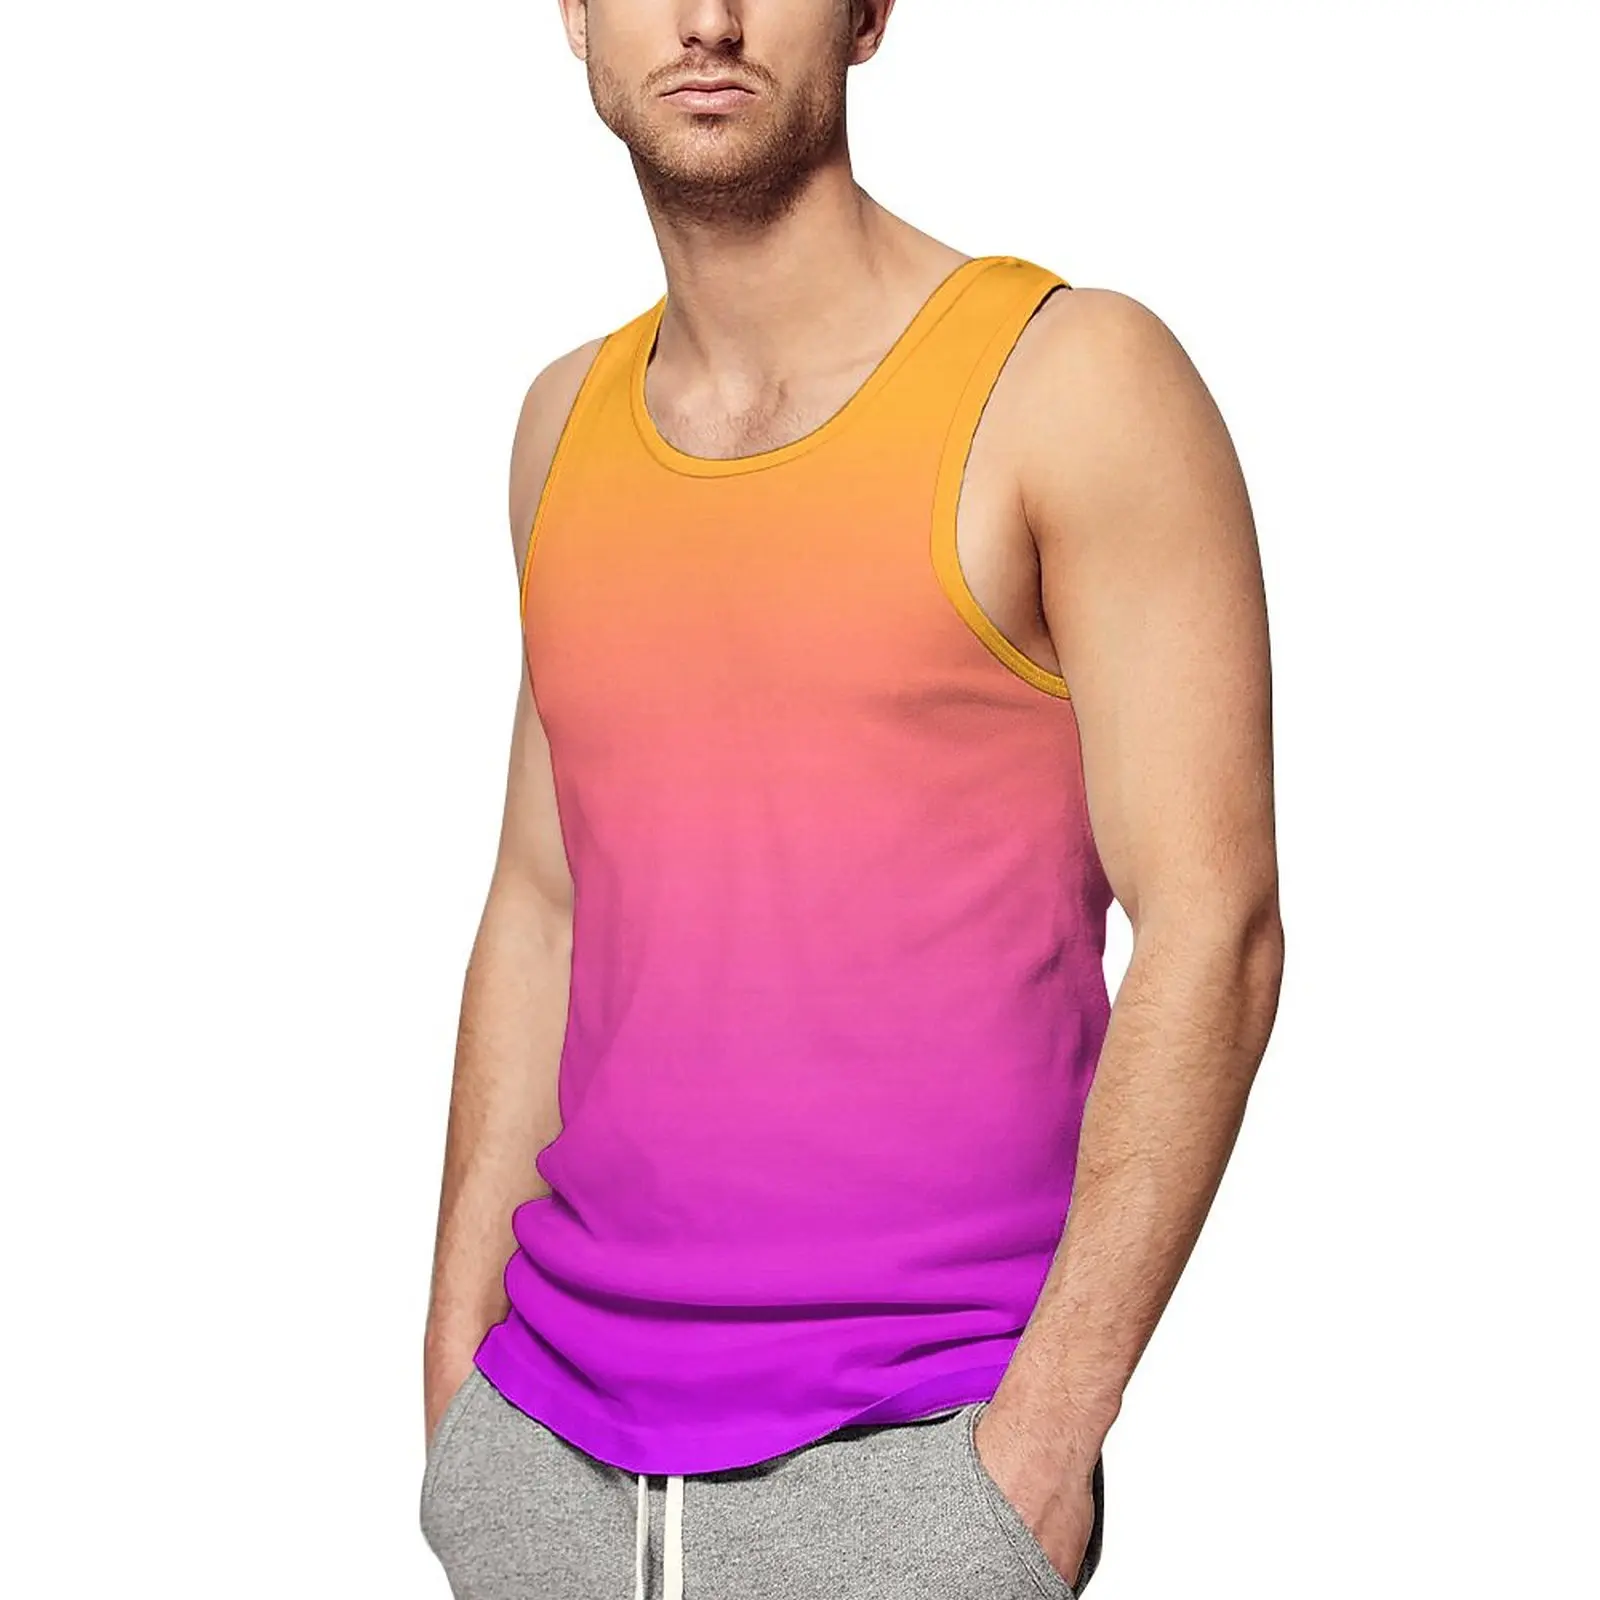 

Watercolor Sunset Tank Top Men Gradient Ombre Muscle Tops Summer Workout Custom Sleeveless Vests Large Size 4XL 5XL